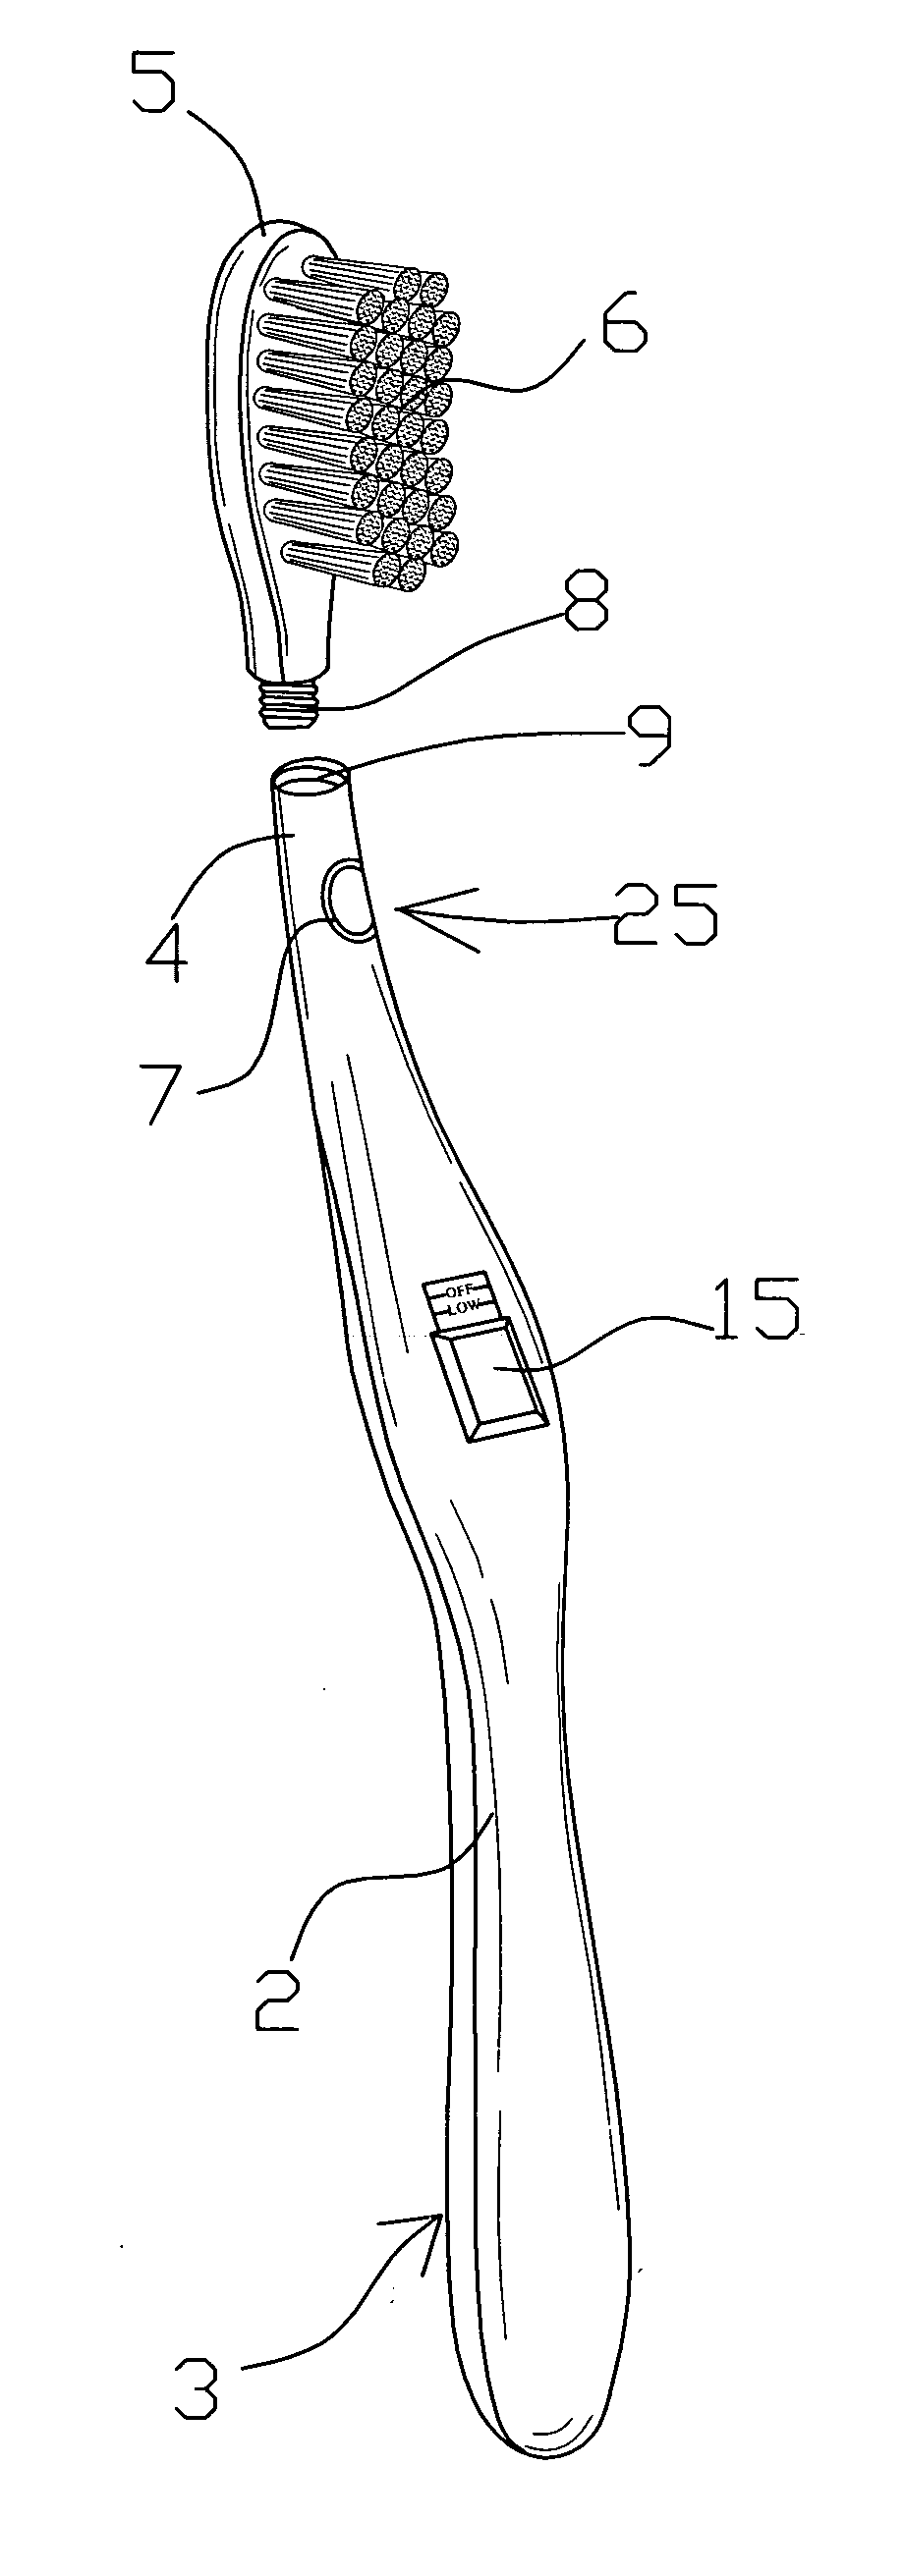 Toothbrush with light source for illuminating oral cavity